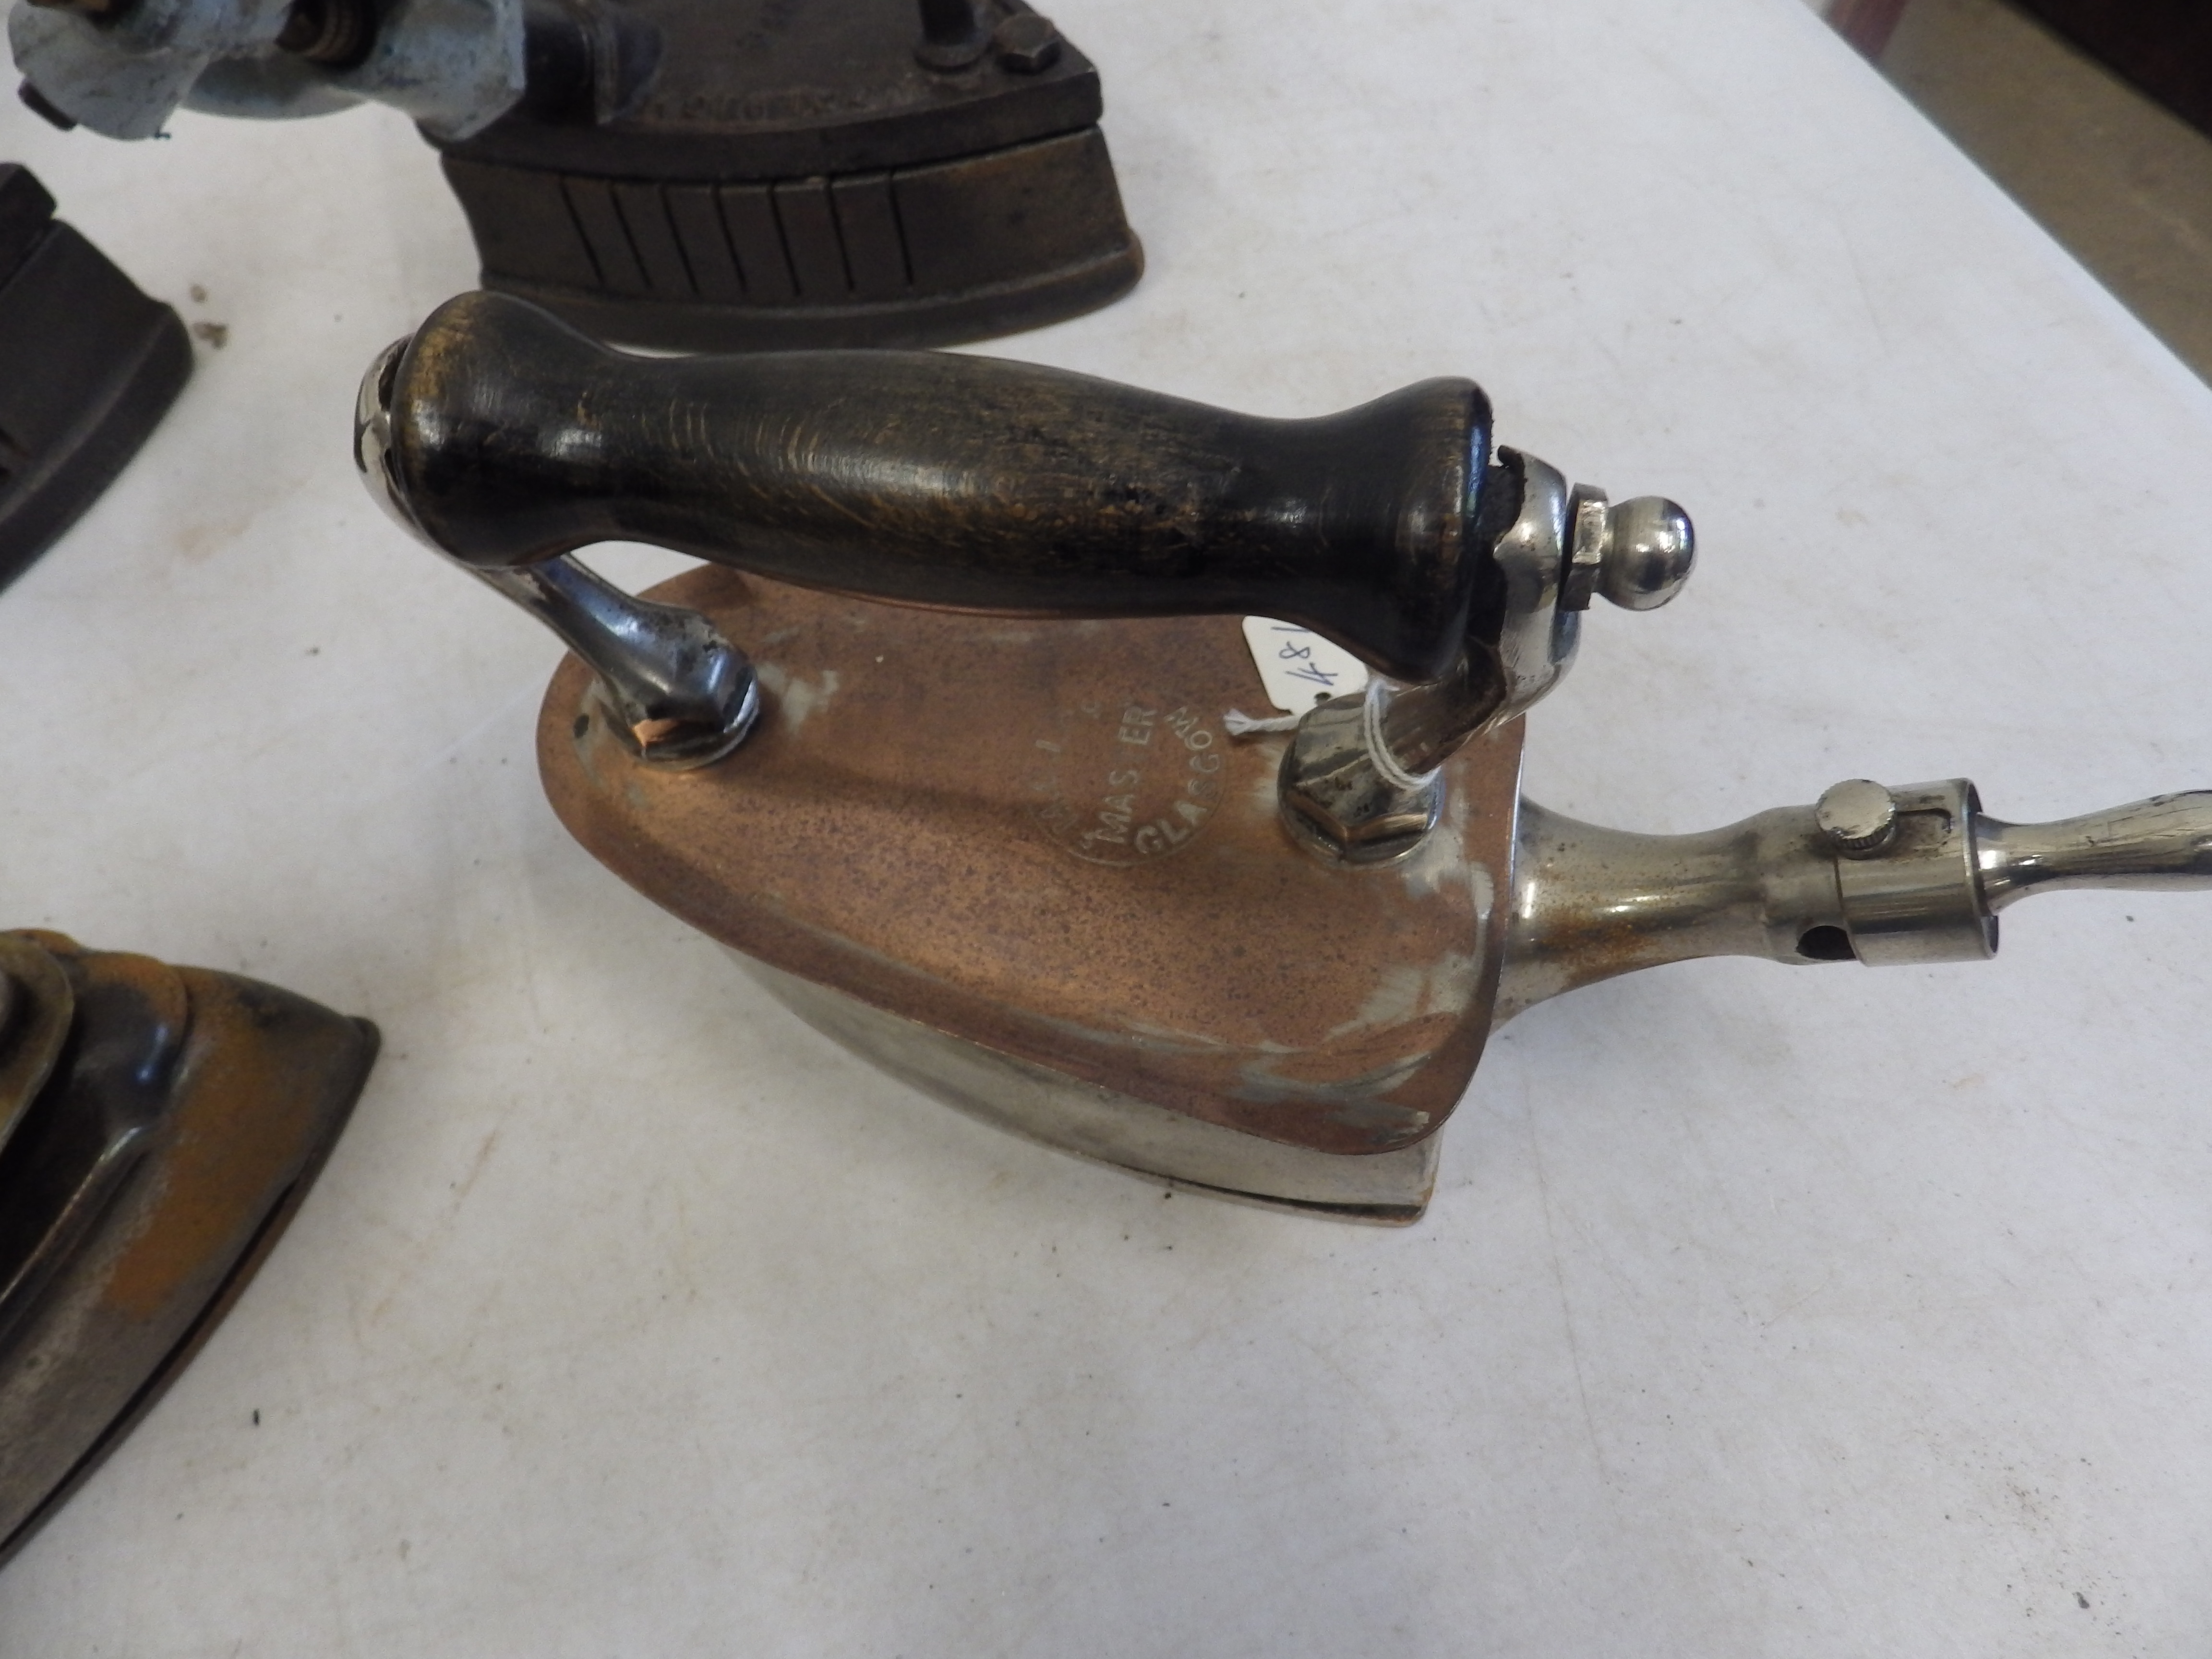 2 M G I Co Glasgow Master gas irons with copper/brass heat shields together with 2 Lister Bros No. - Bild 5 aus 6